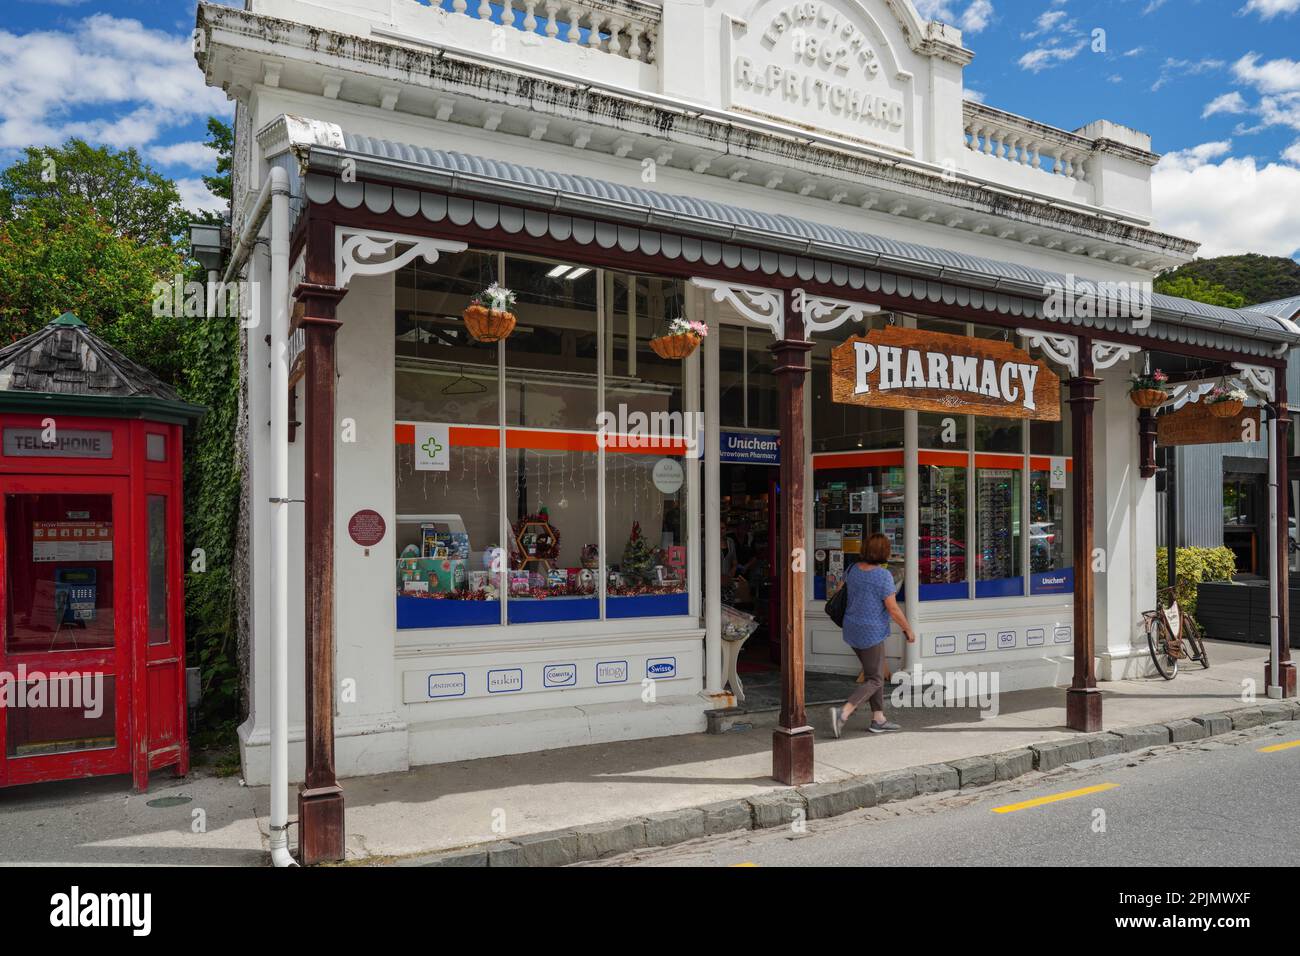 This is Arrowtown in New Zealand on the South Island. They have kept and renovated many old buildings like this pharmacy attracting tourists. Stock Photo